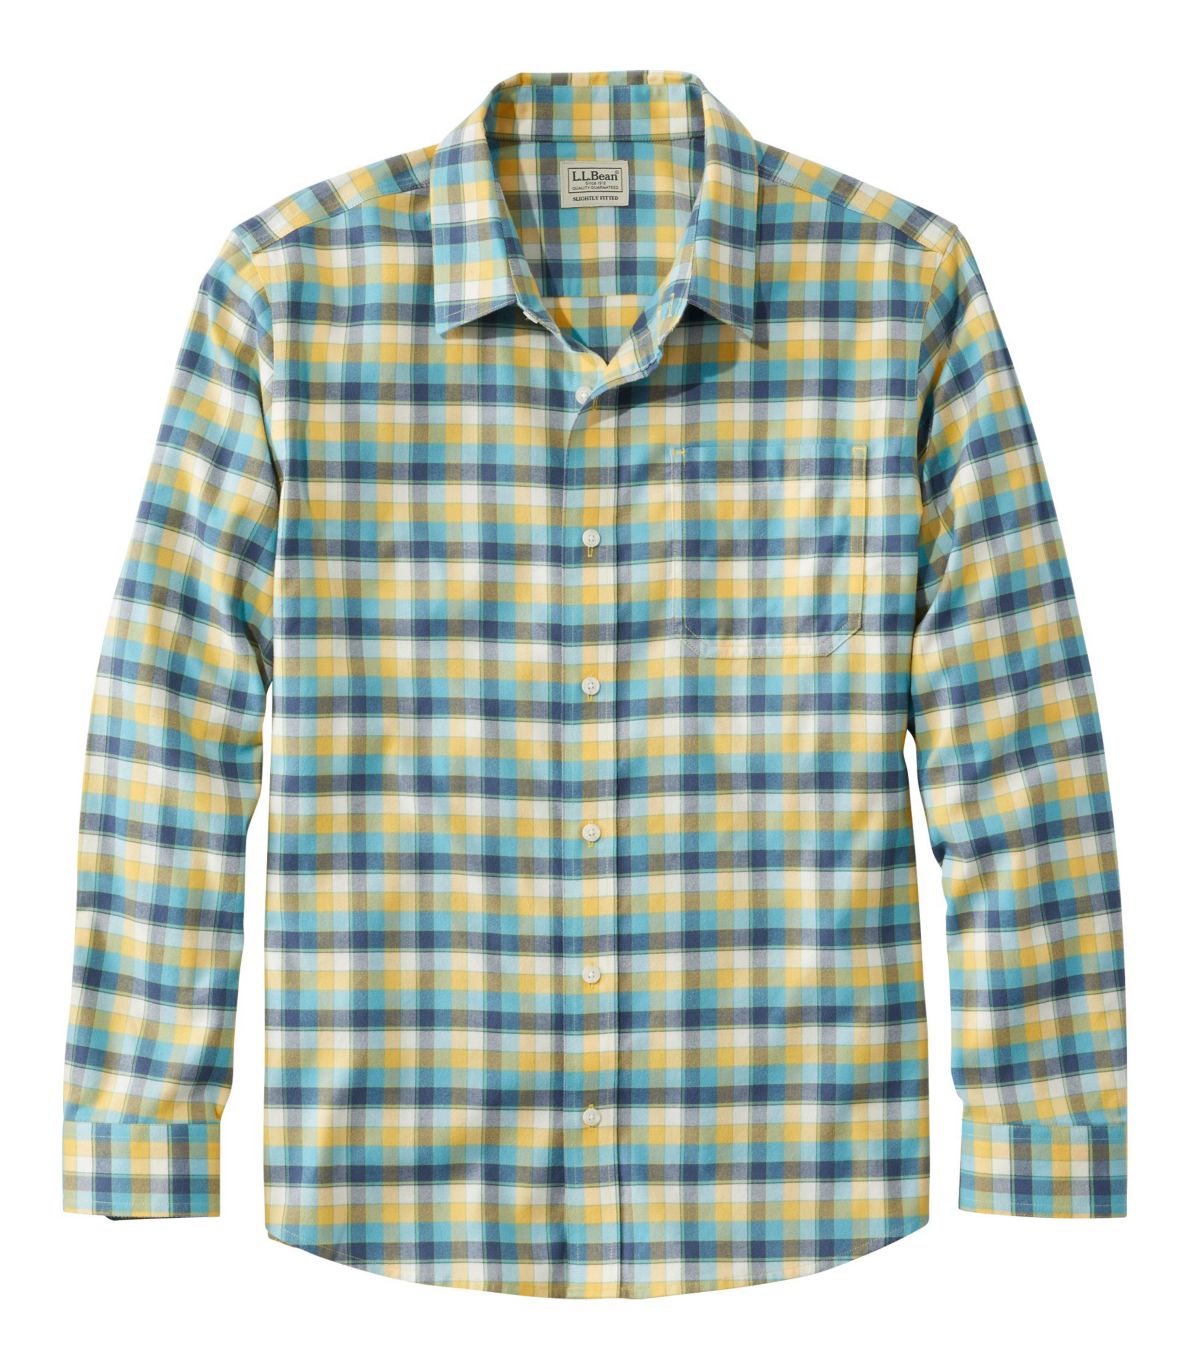 Men's Wrinkle-Free Ultrasoft Brushed Cotton Shirt, Long-Sleeve, Slightly Fitted Untucked Fit